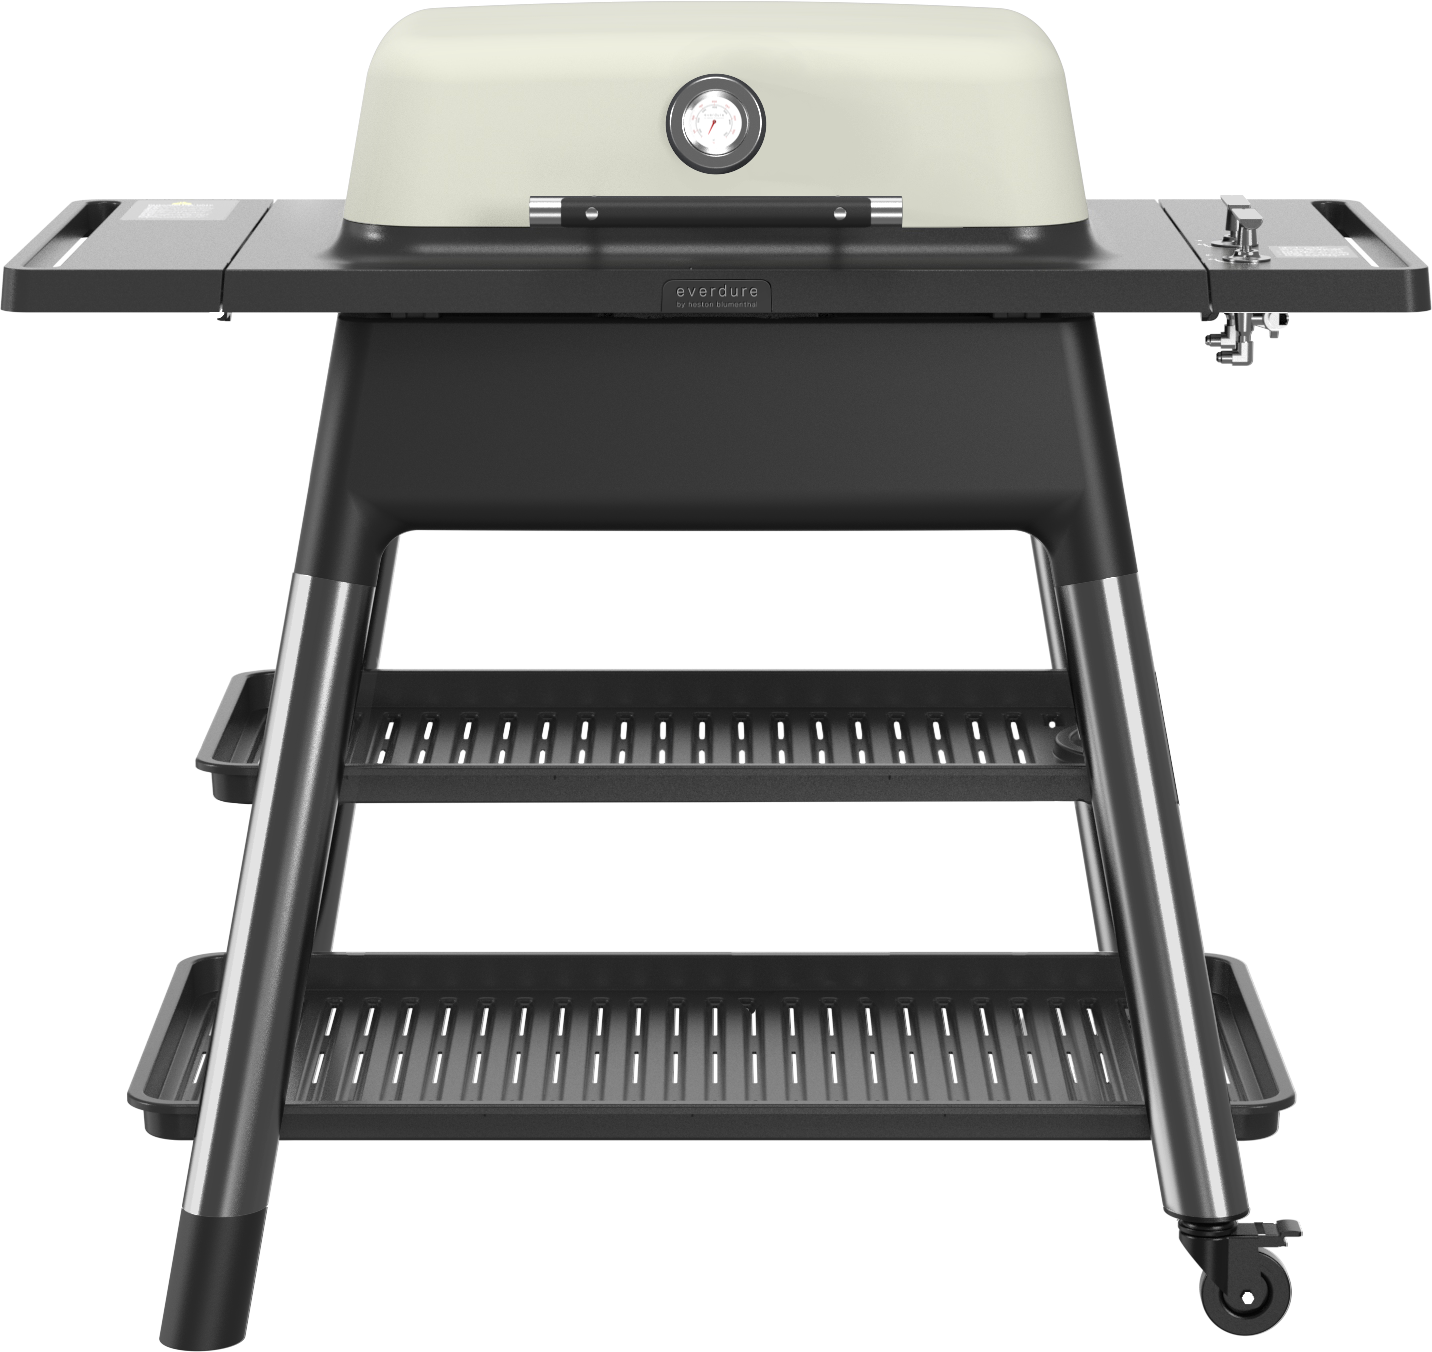 Everdure FORCE Gasgrill stone - Neues Modell